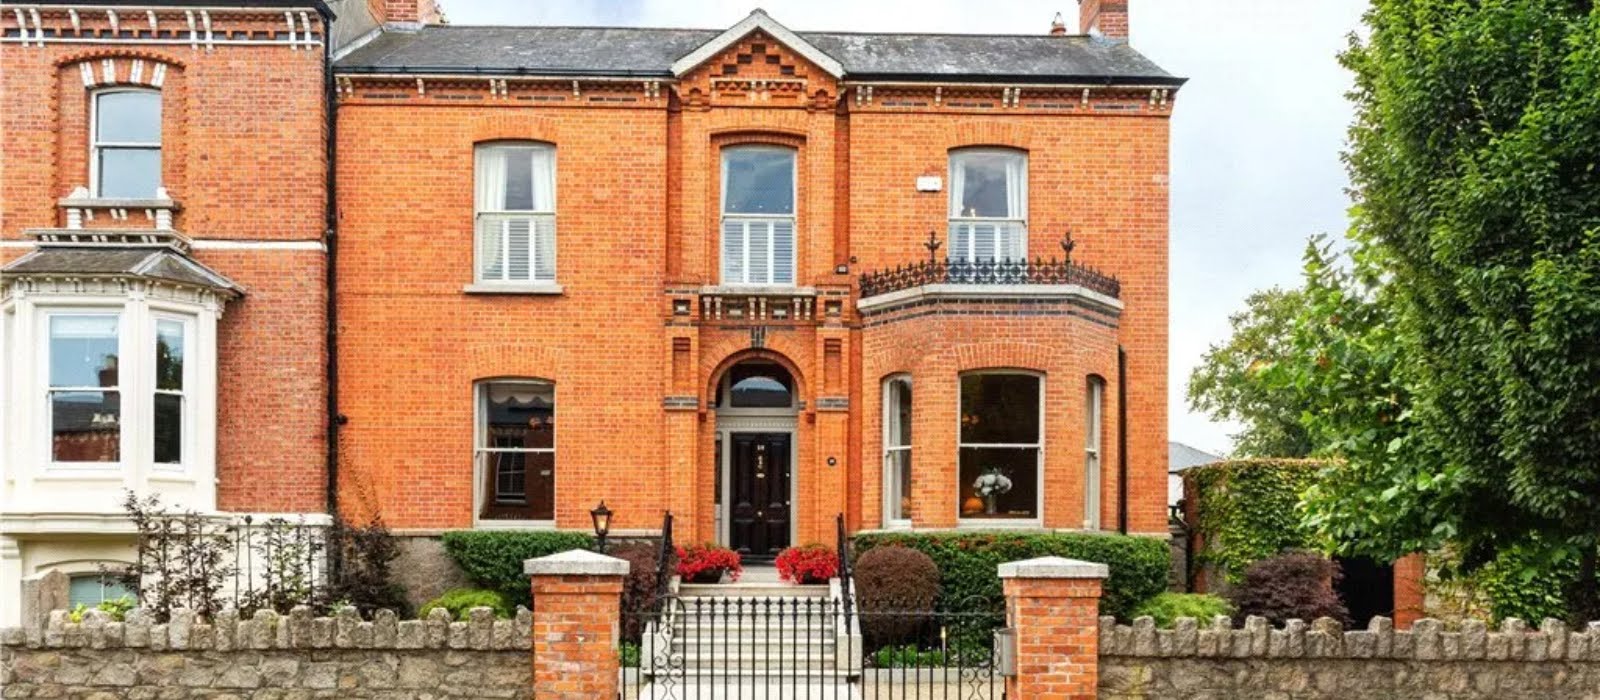 This beautiful red brick Victorian residence is on the market for €2.5 million